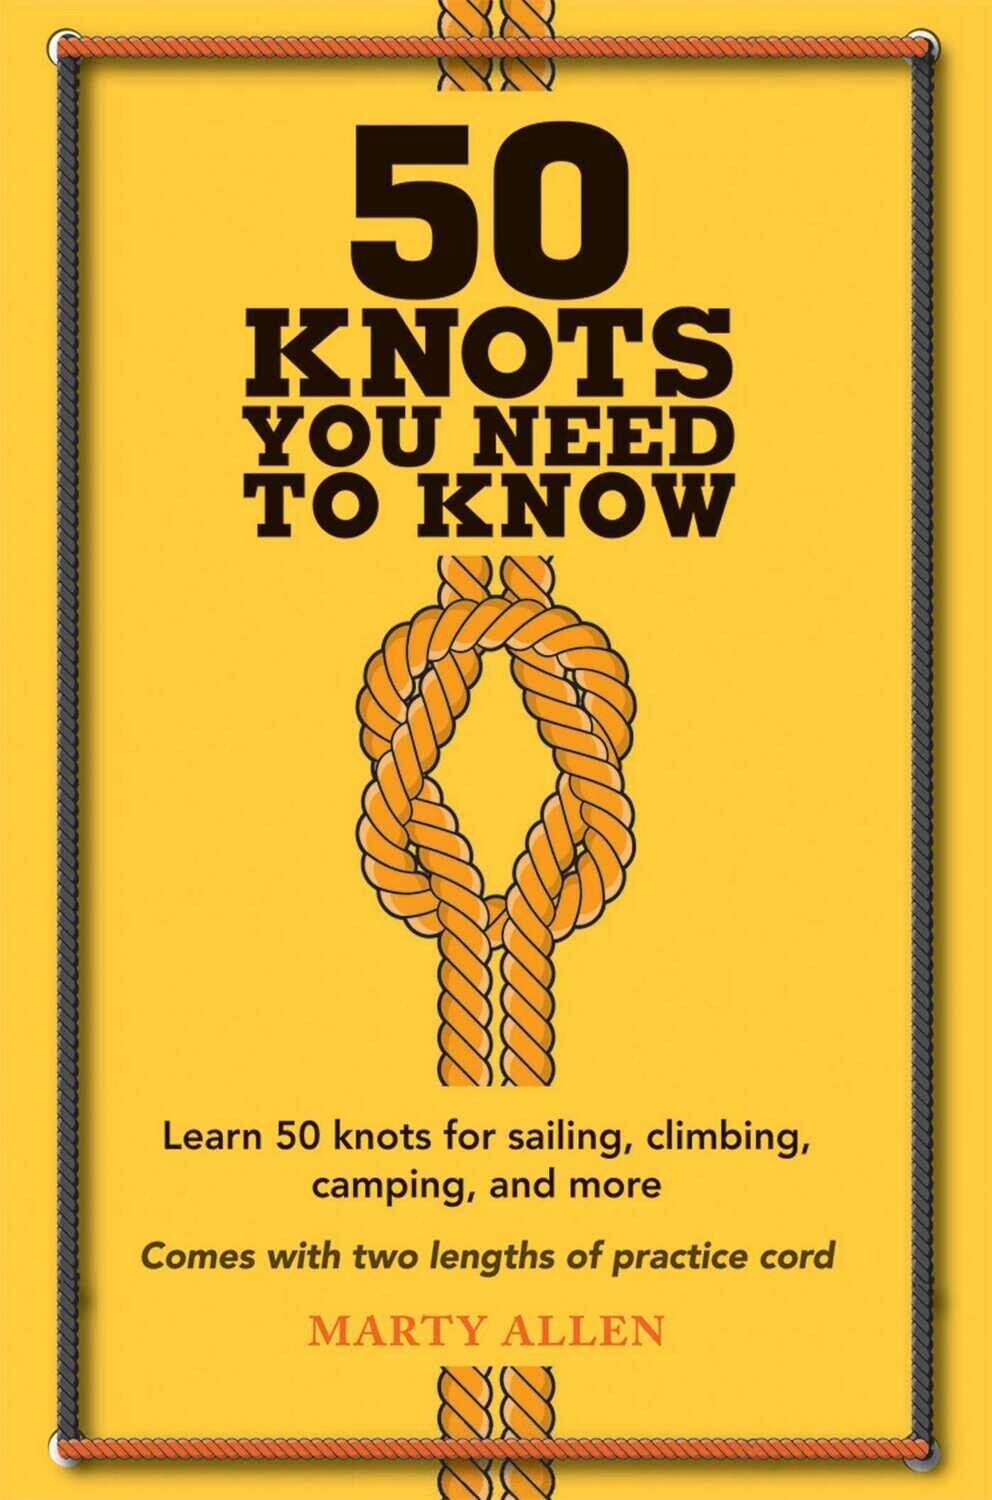 50 Knots You Need to Know: Learn 50 knots for sailing, climbing, camping, and more